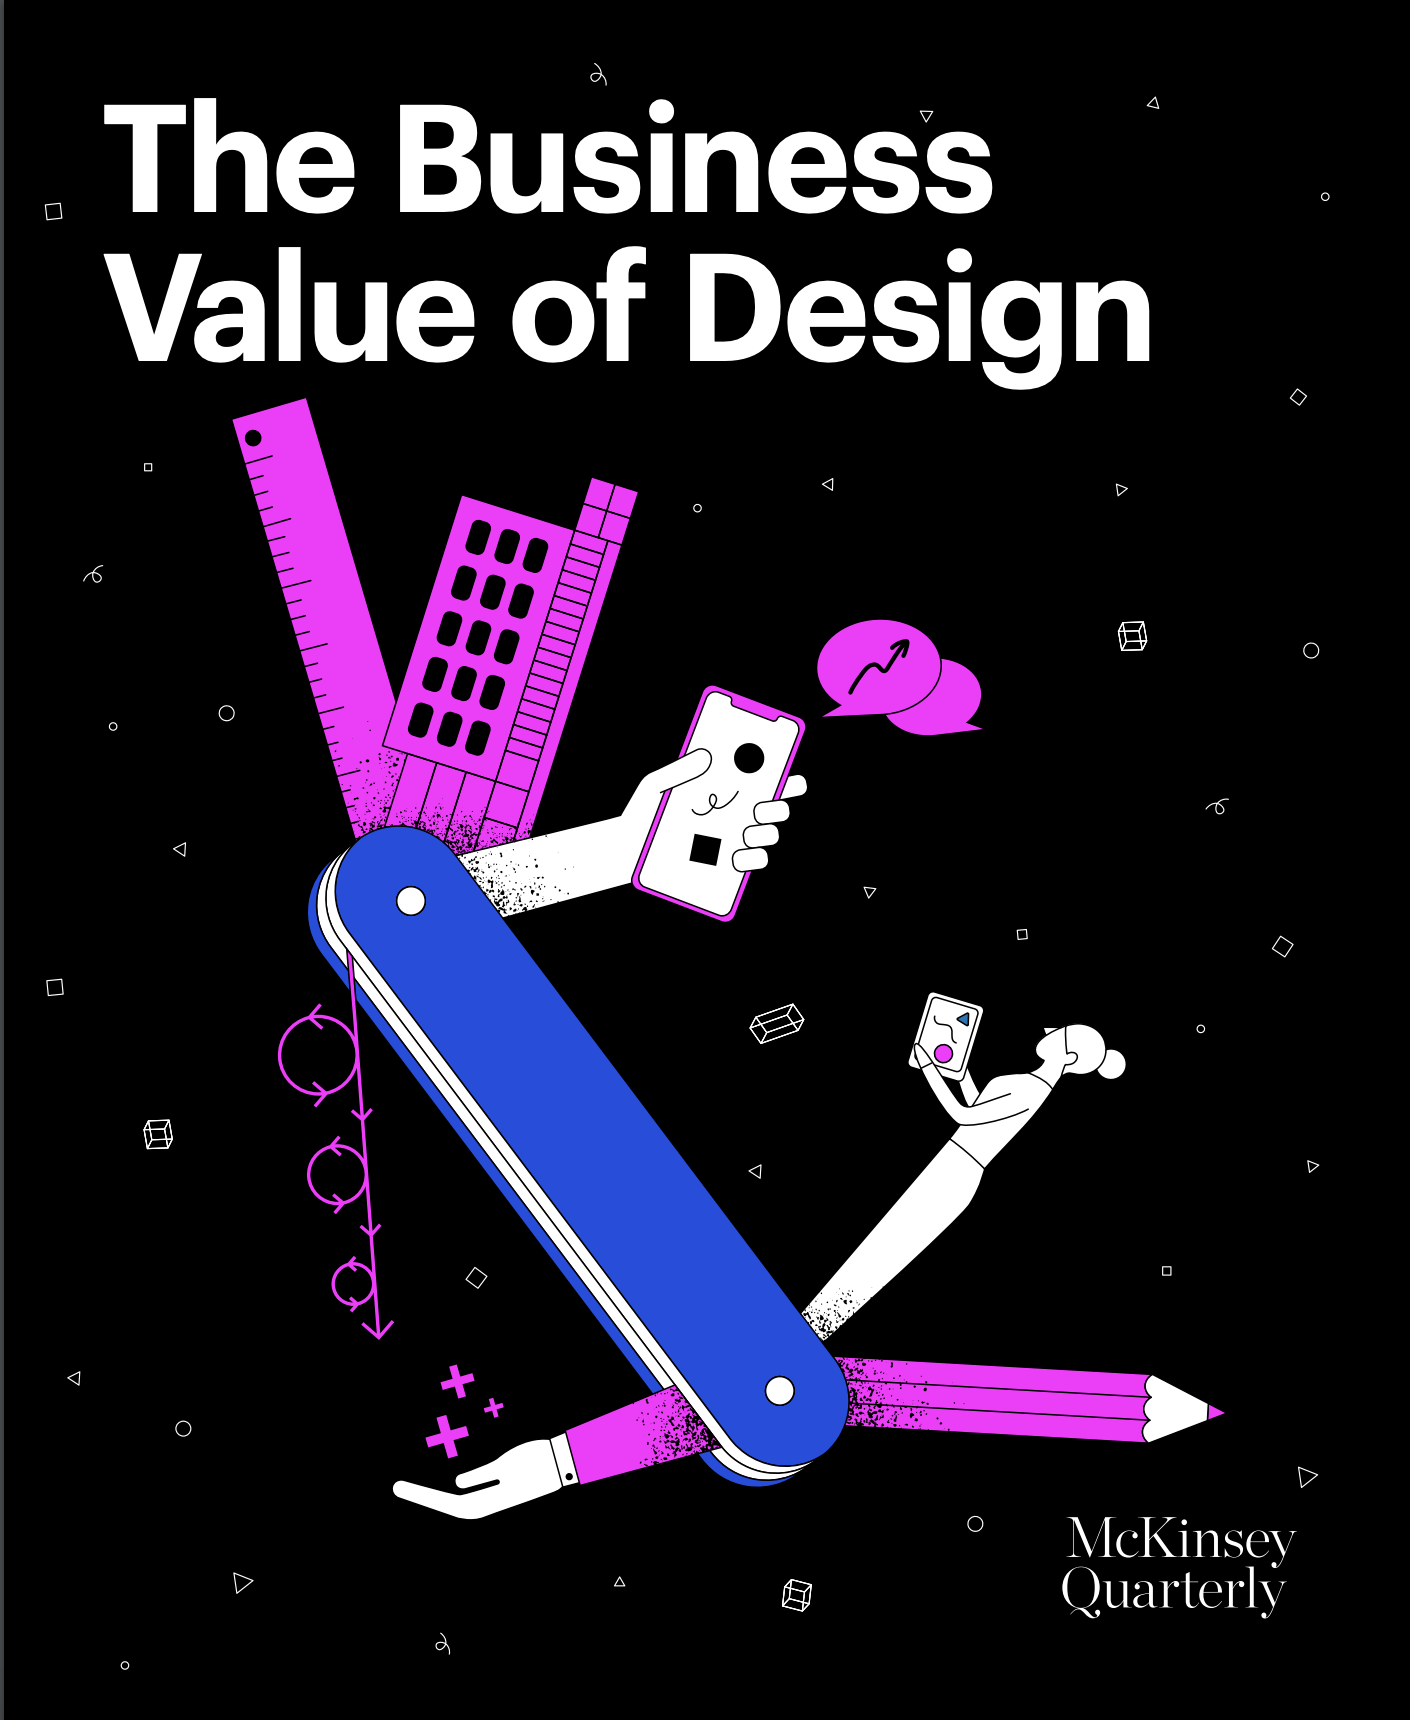 McKinsey - The Business Value of Design